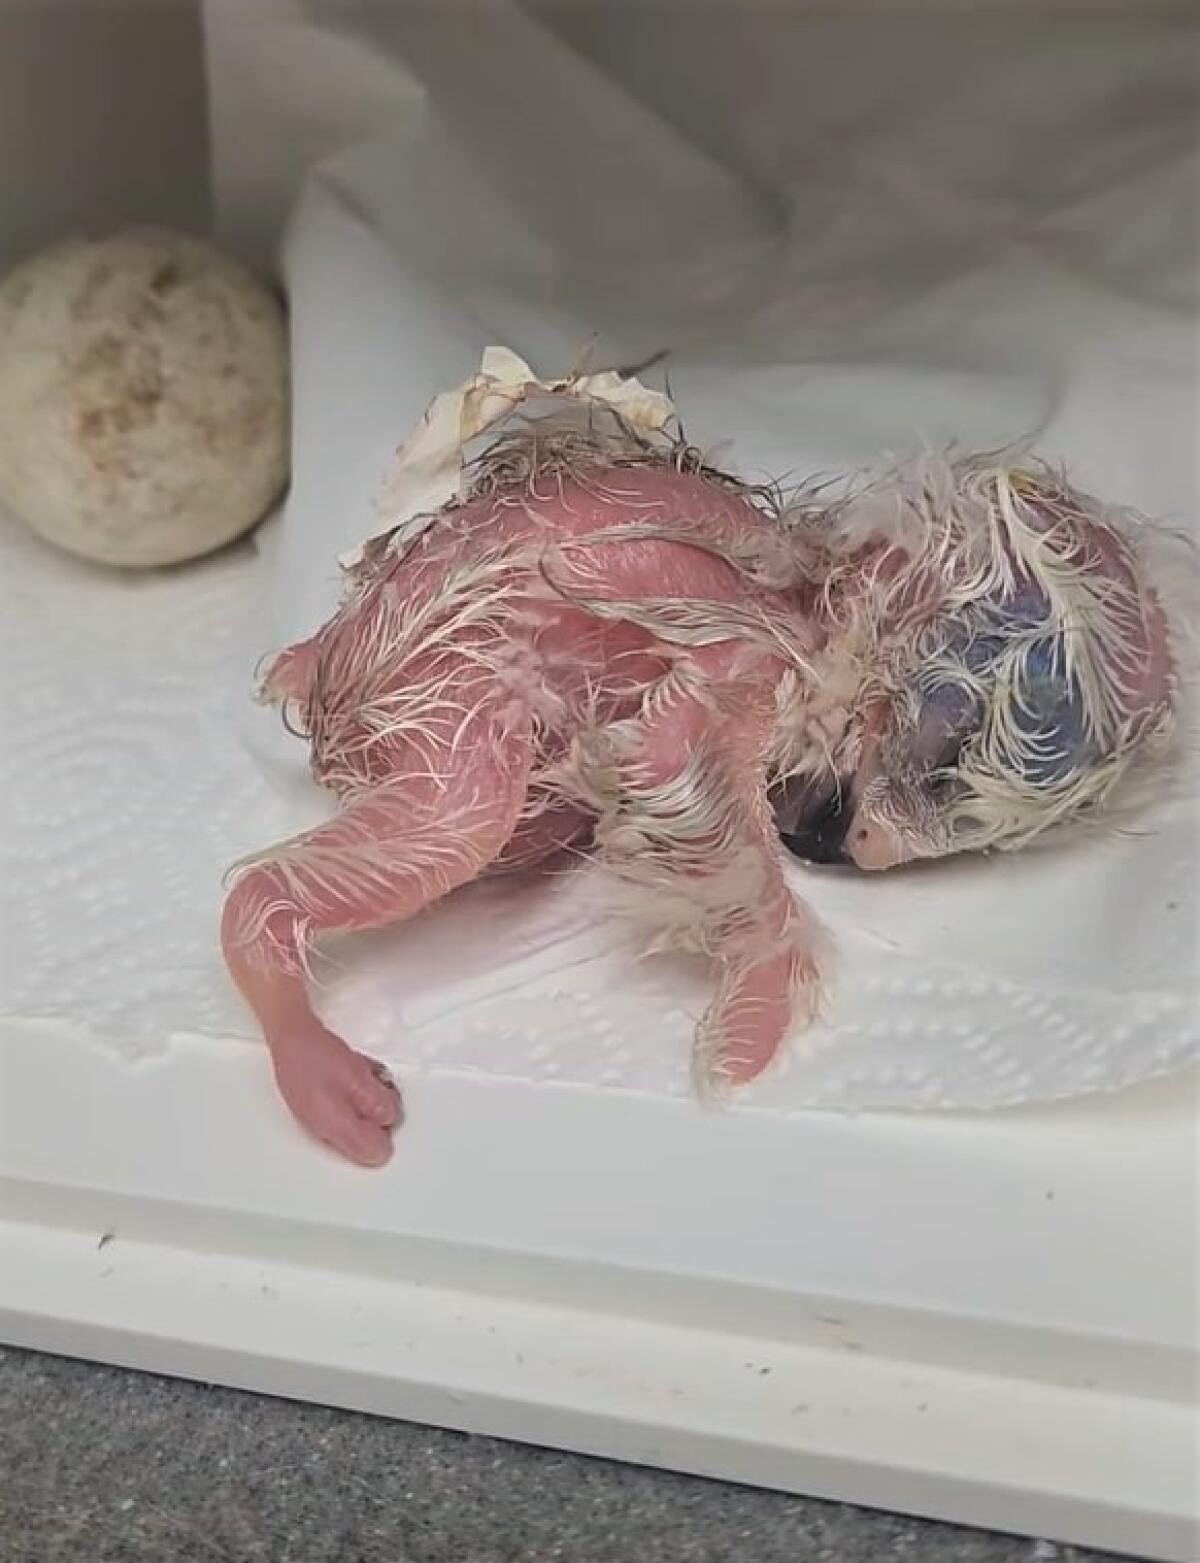 A baby red-tailed hawk, seen in a video posted by the Wetlands & Wildlife Care Center, hatched Tuesday evening.